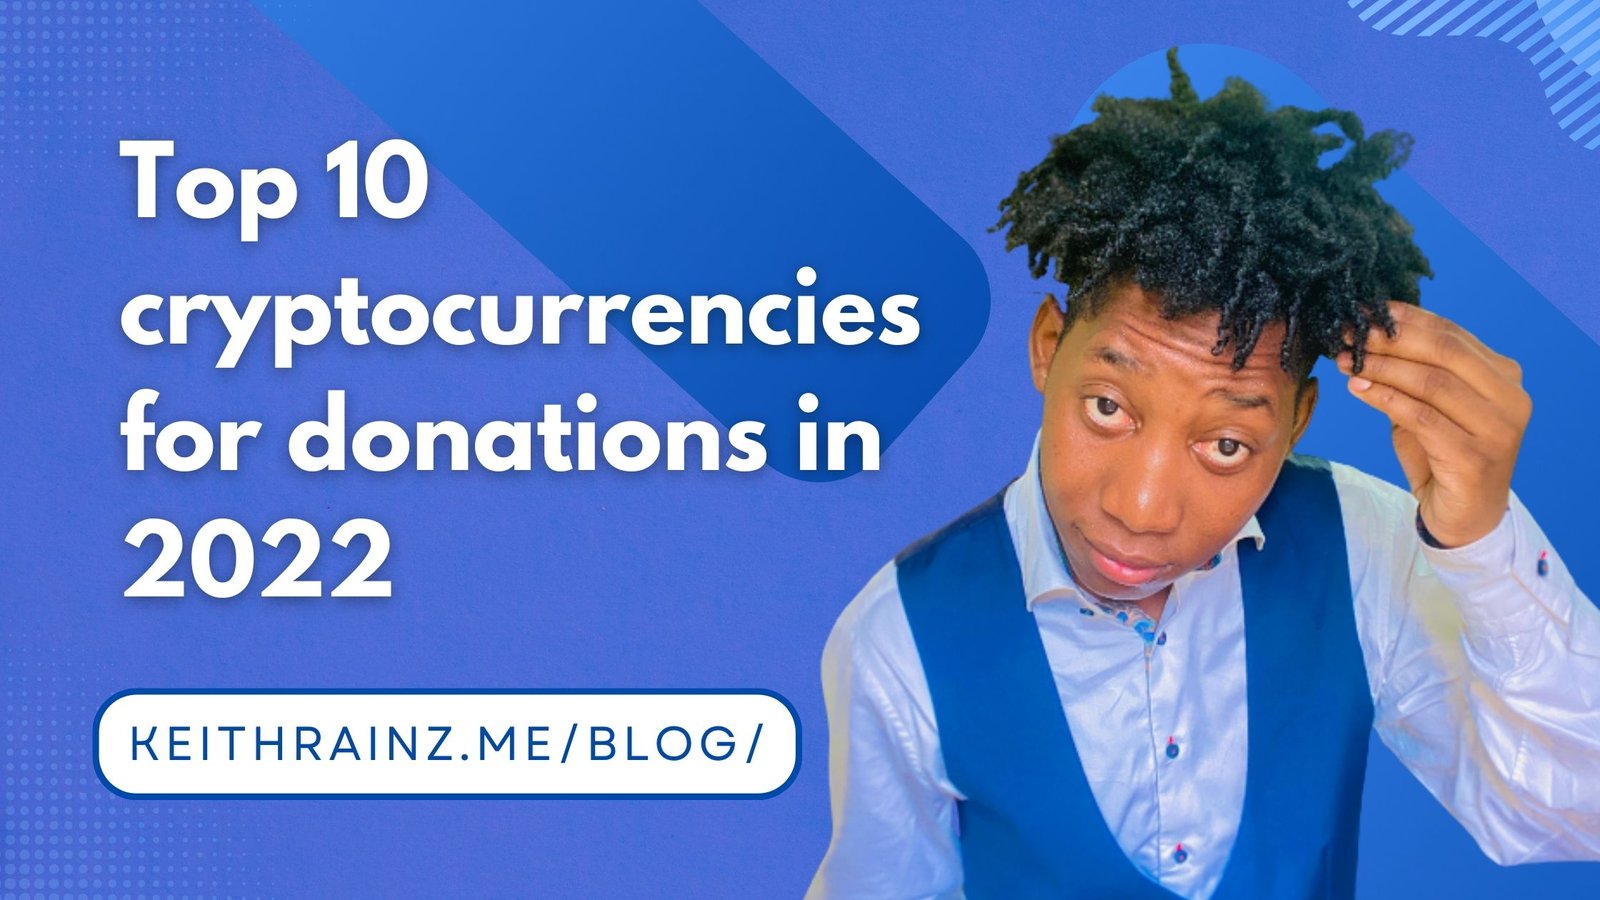 Top 10 cryptocurrencies for donations in 2022